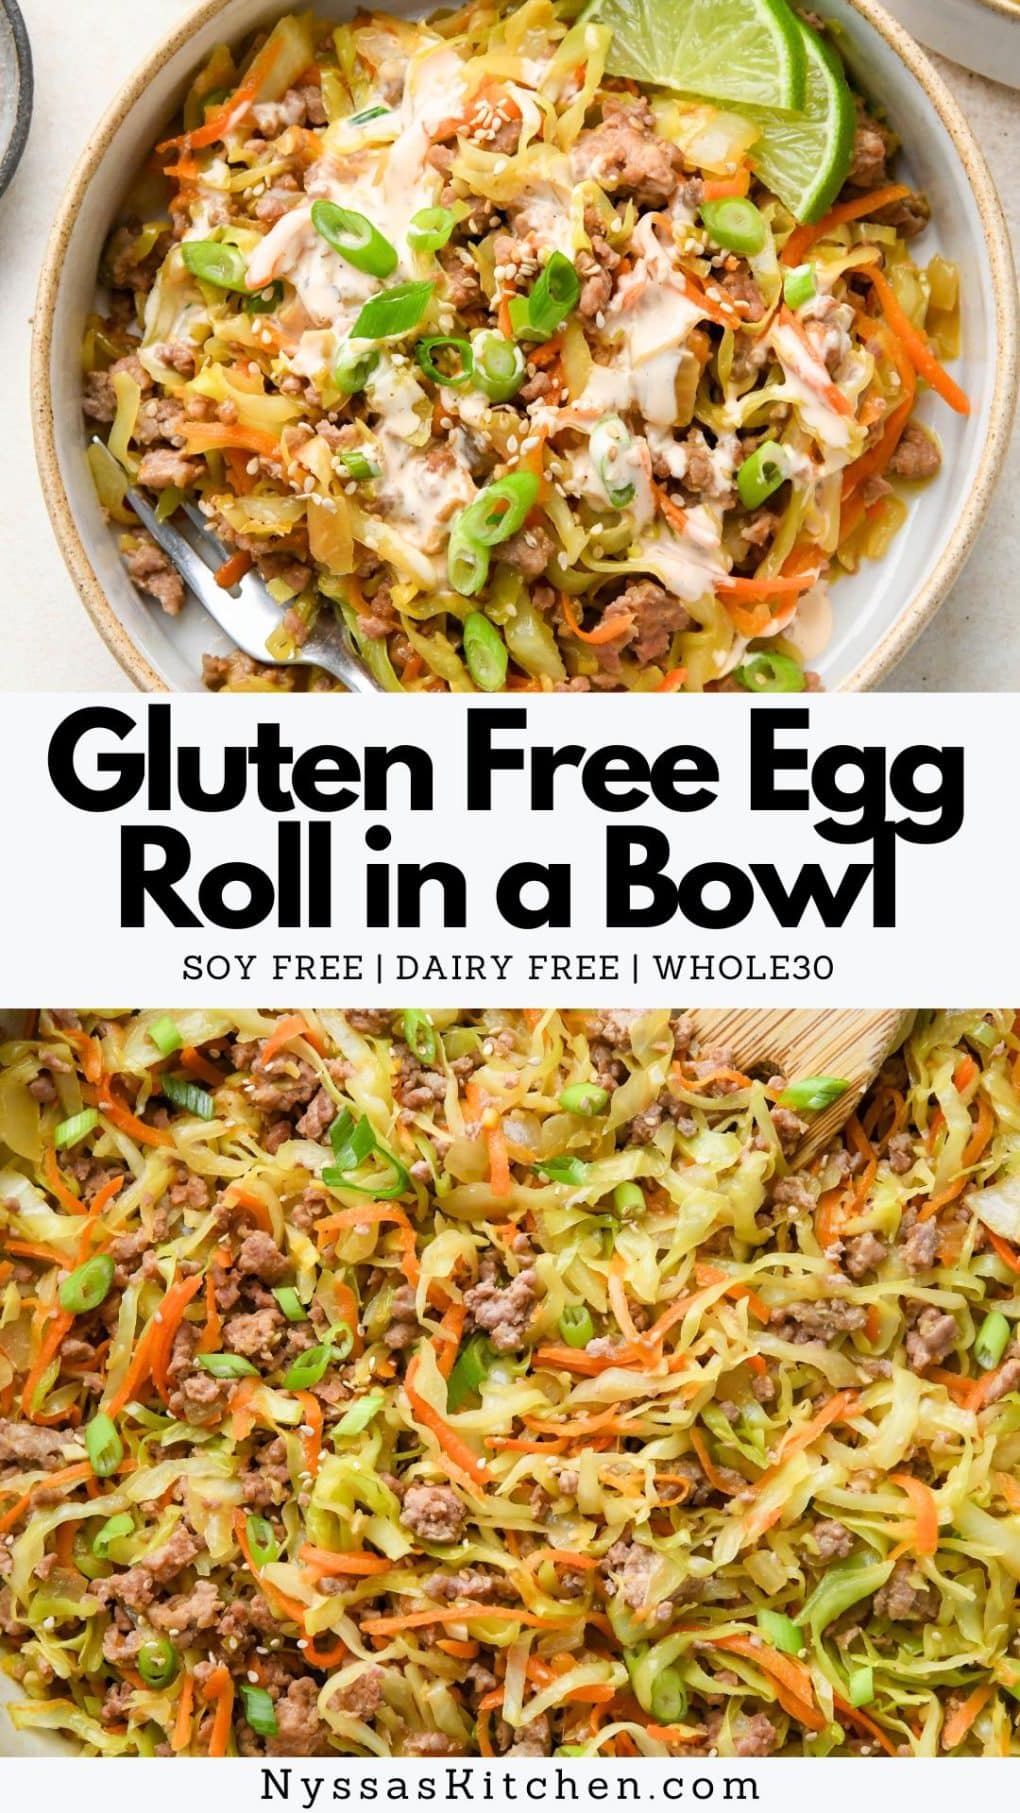 Pinterest pin for Gluten Free Egg Roll in a Bowl